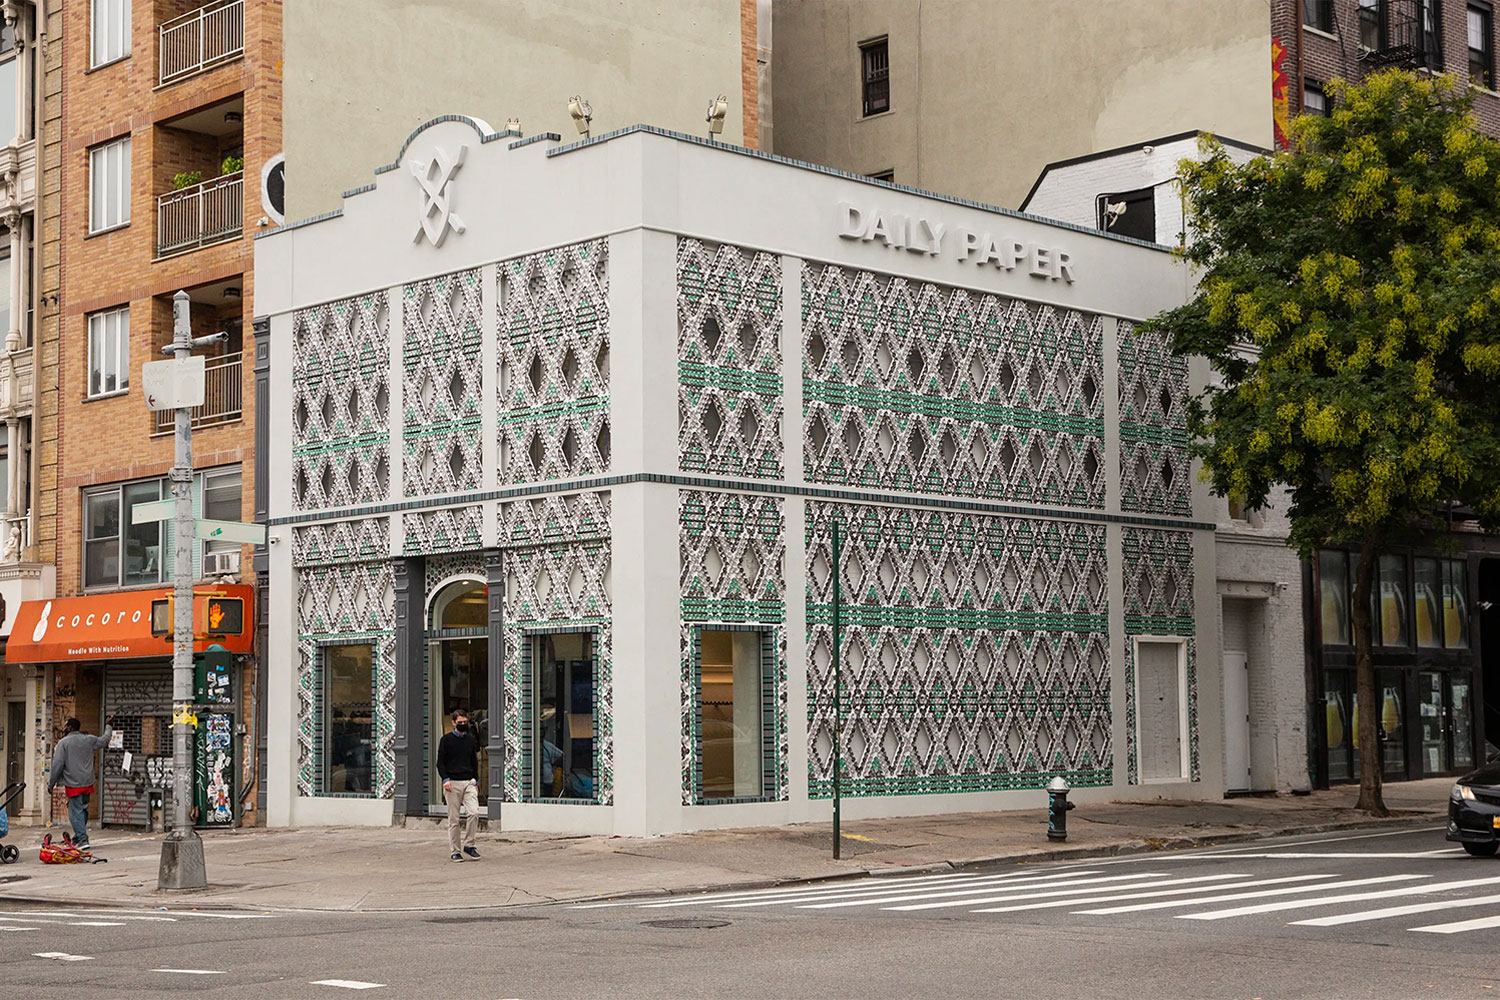 A photograph of the exterior of the Daily Paper Store